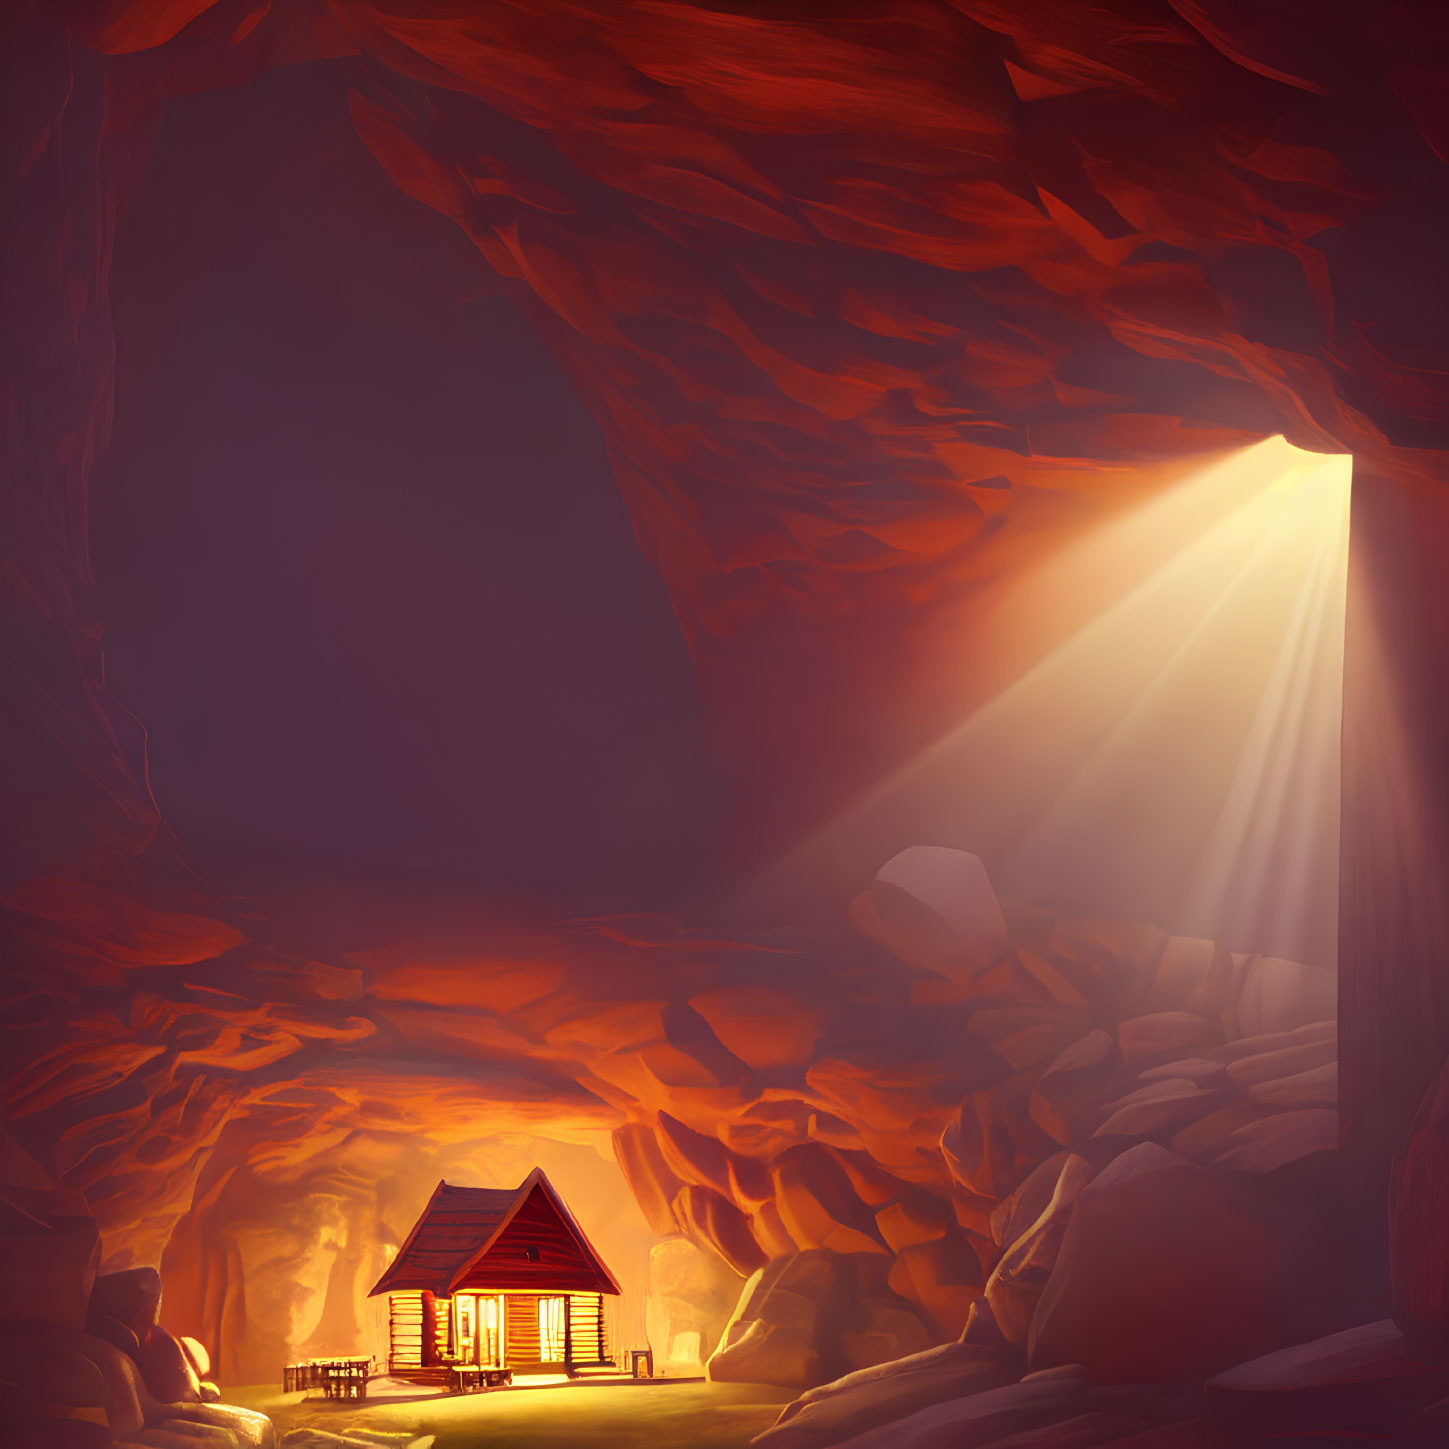 Cabin in cavern with glowing windows and warm light